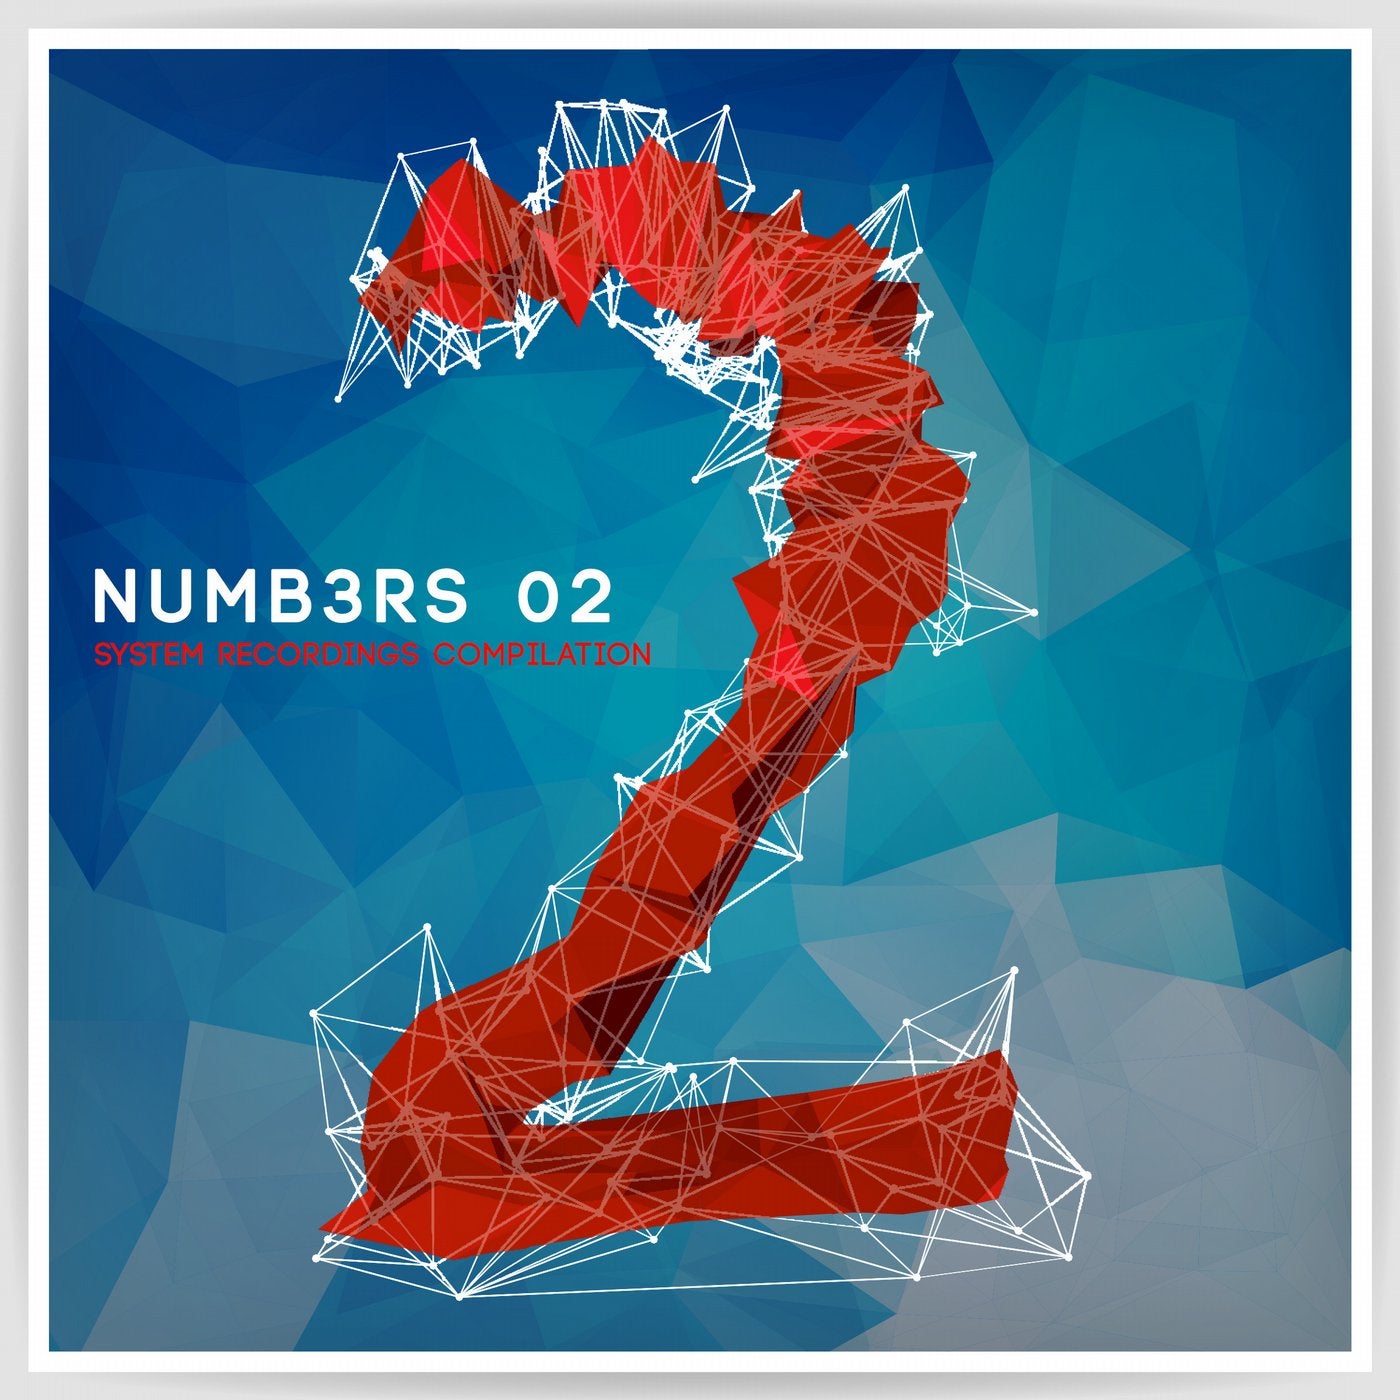 NUMB3RS 02 - system recordings comilation